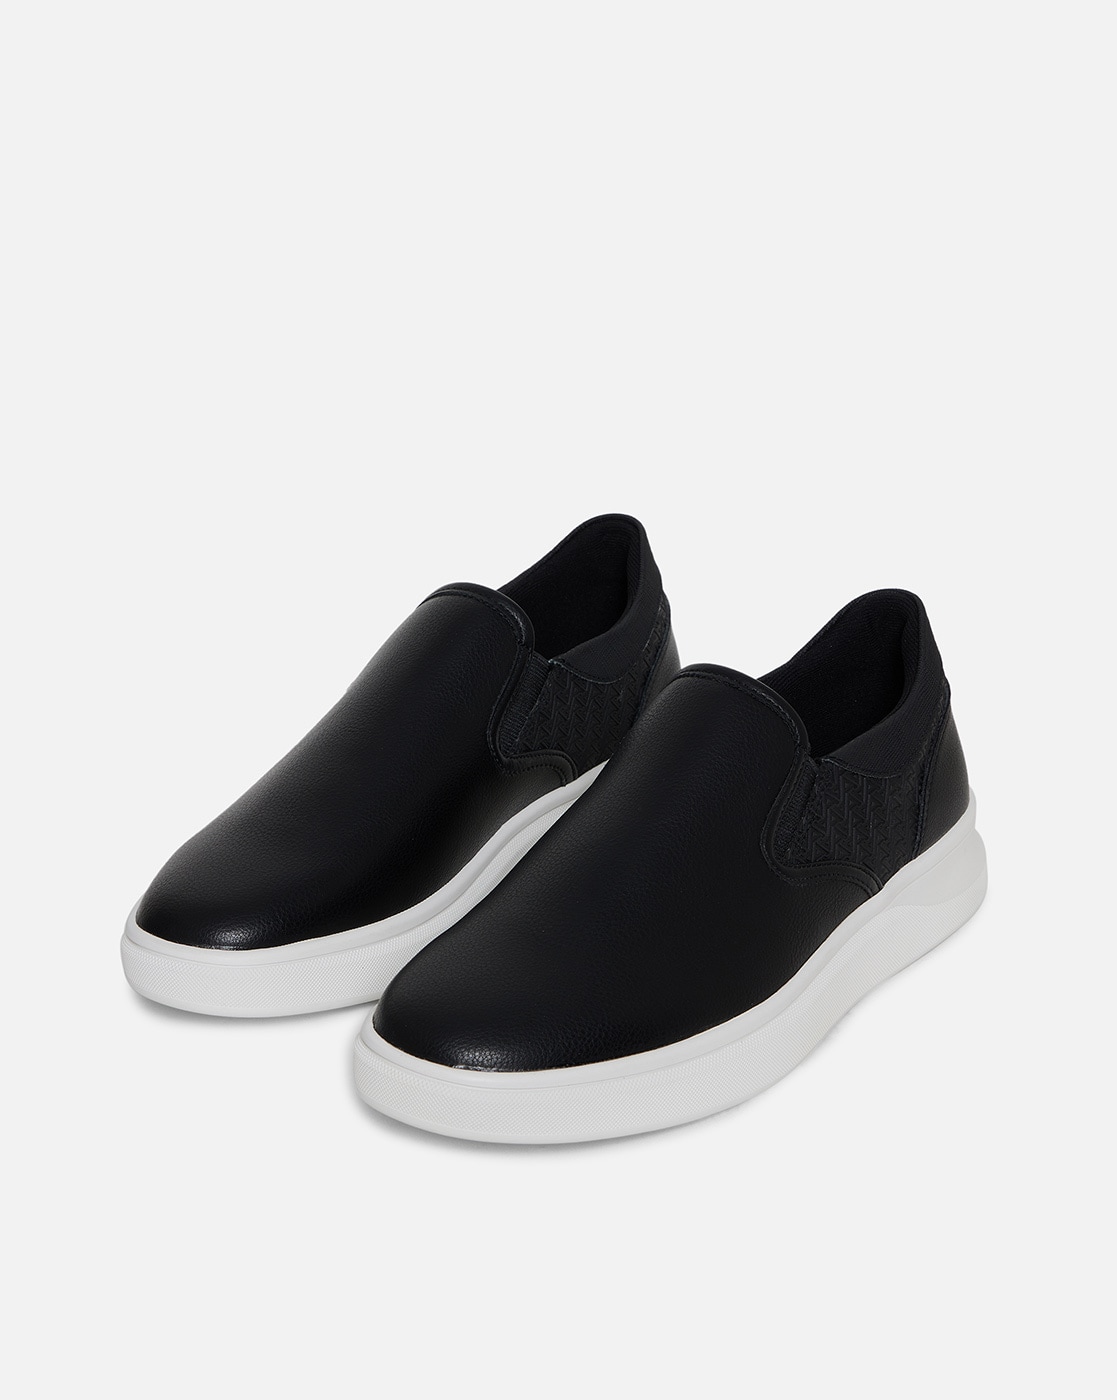 Women's Casual Sneakers | Lace-up, Slip On & More | Sierra